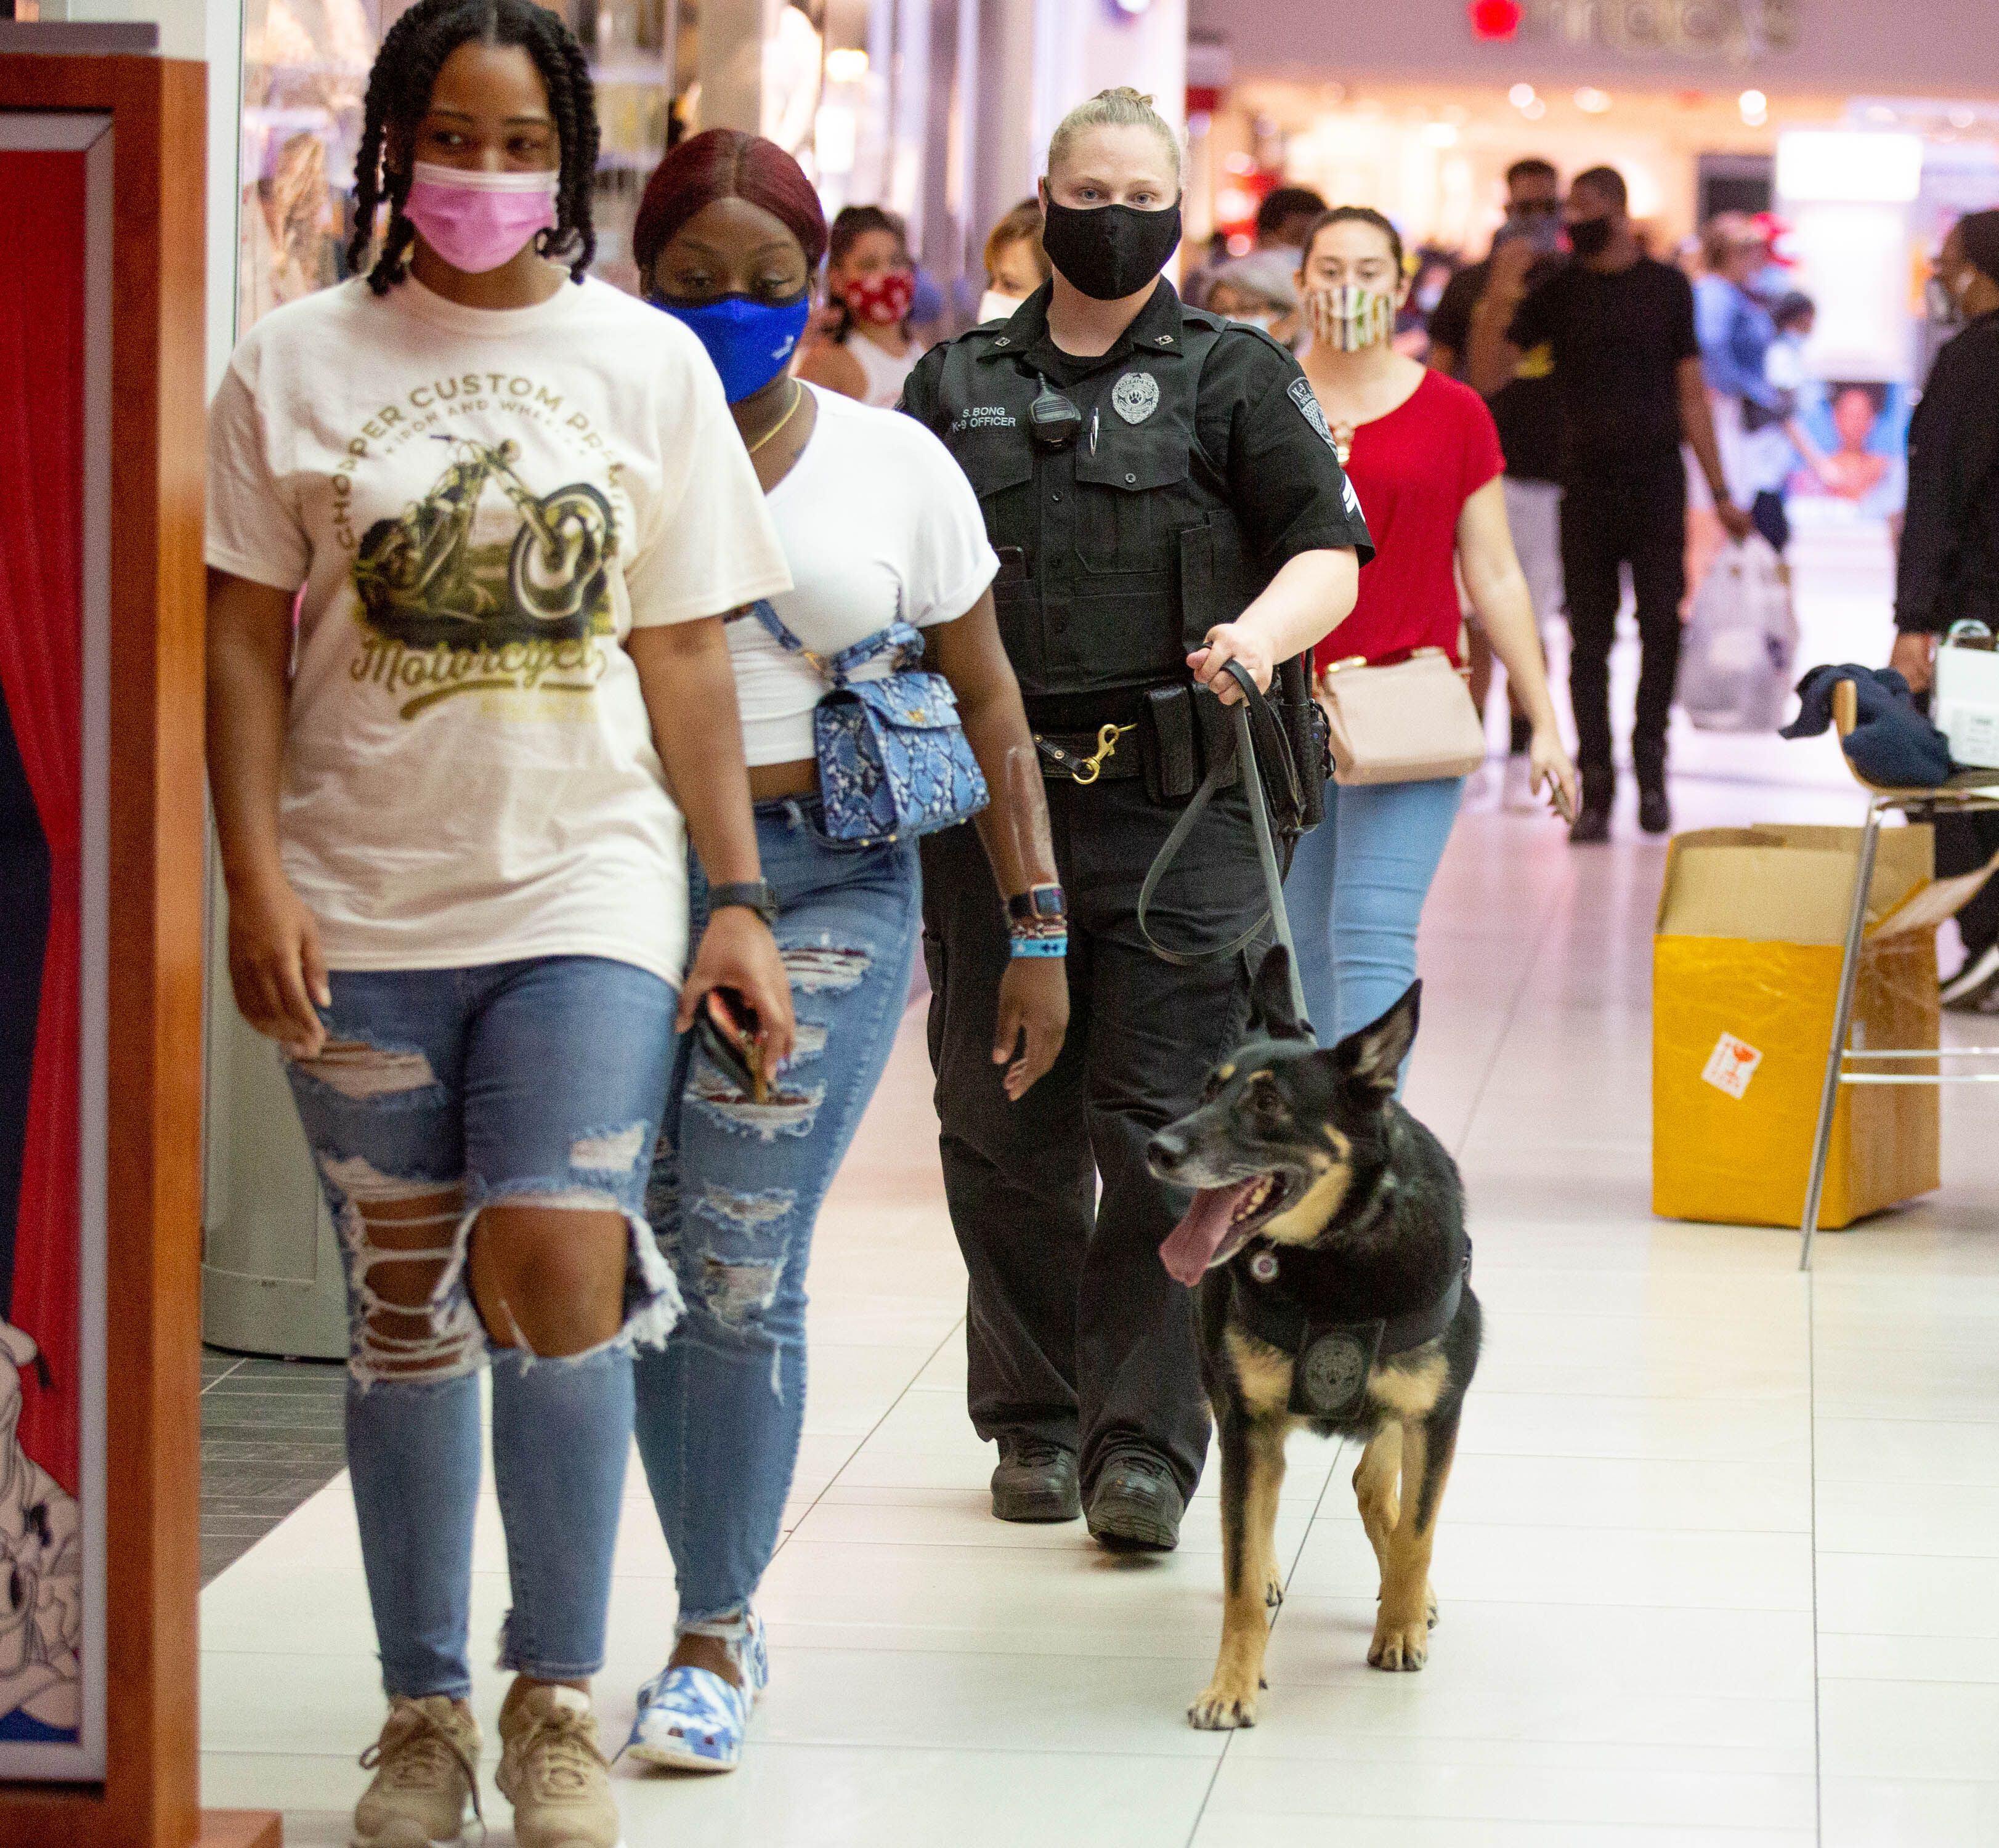 Lenox Square to add metal detectors, K-9 units to beef up mall